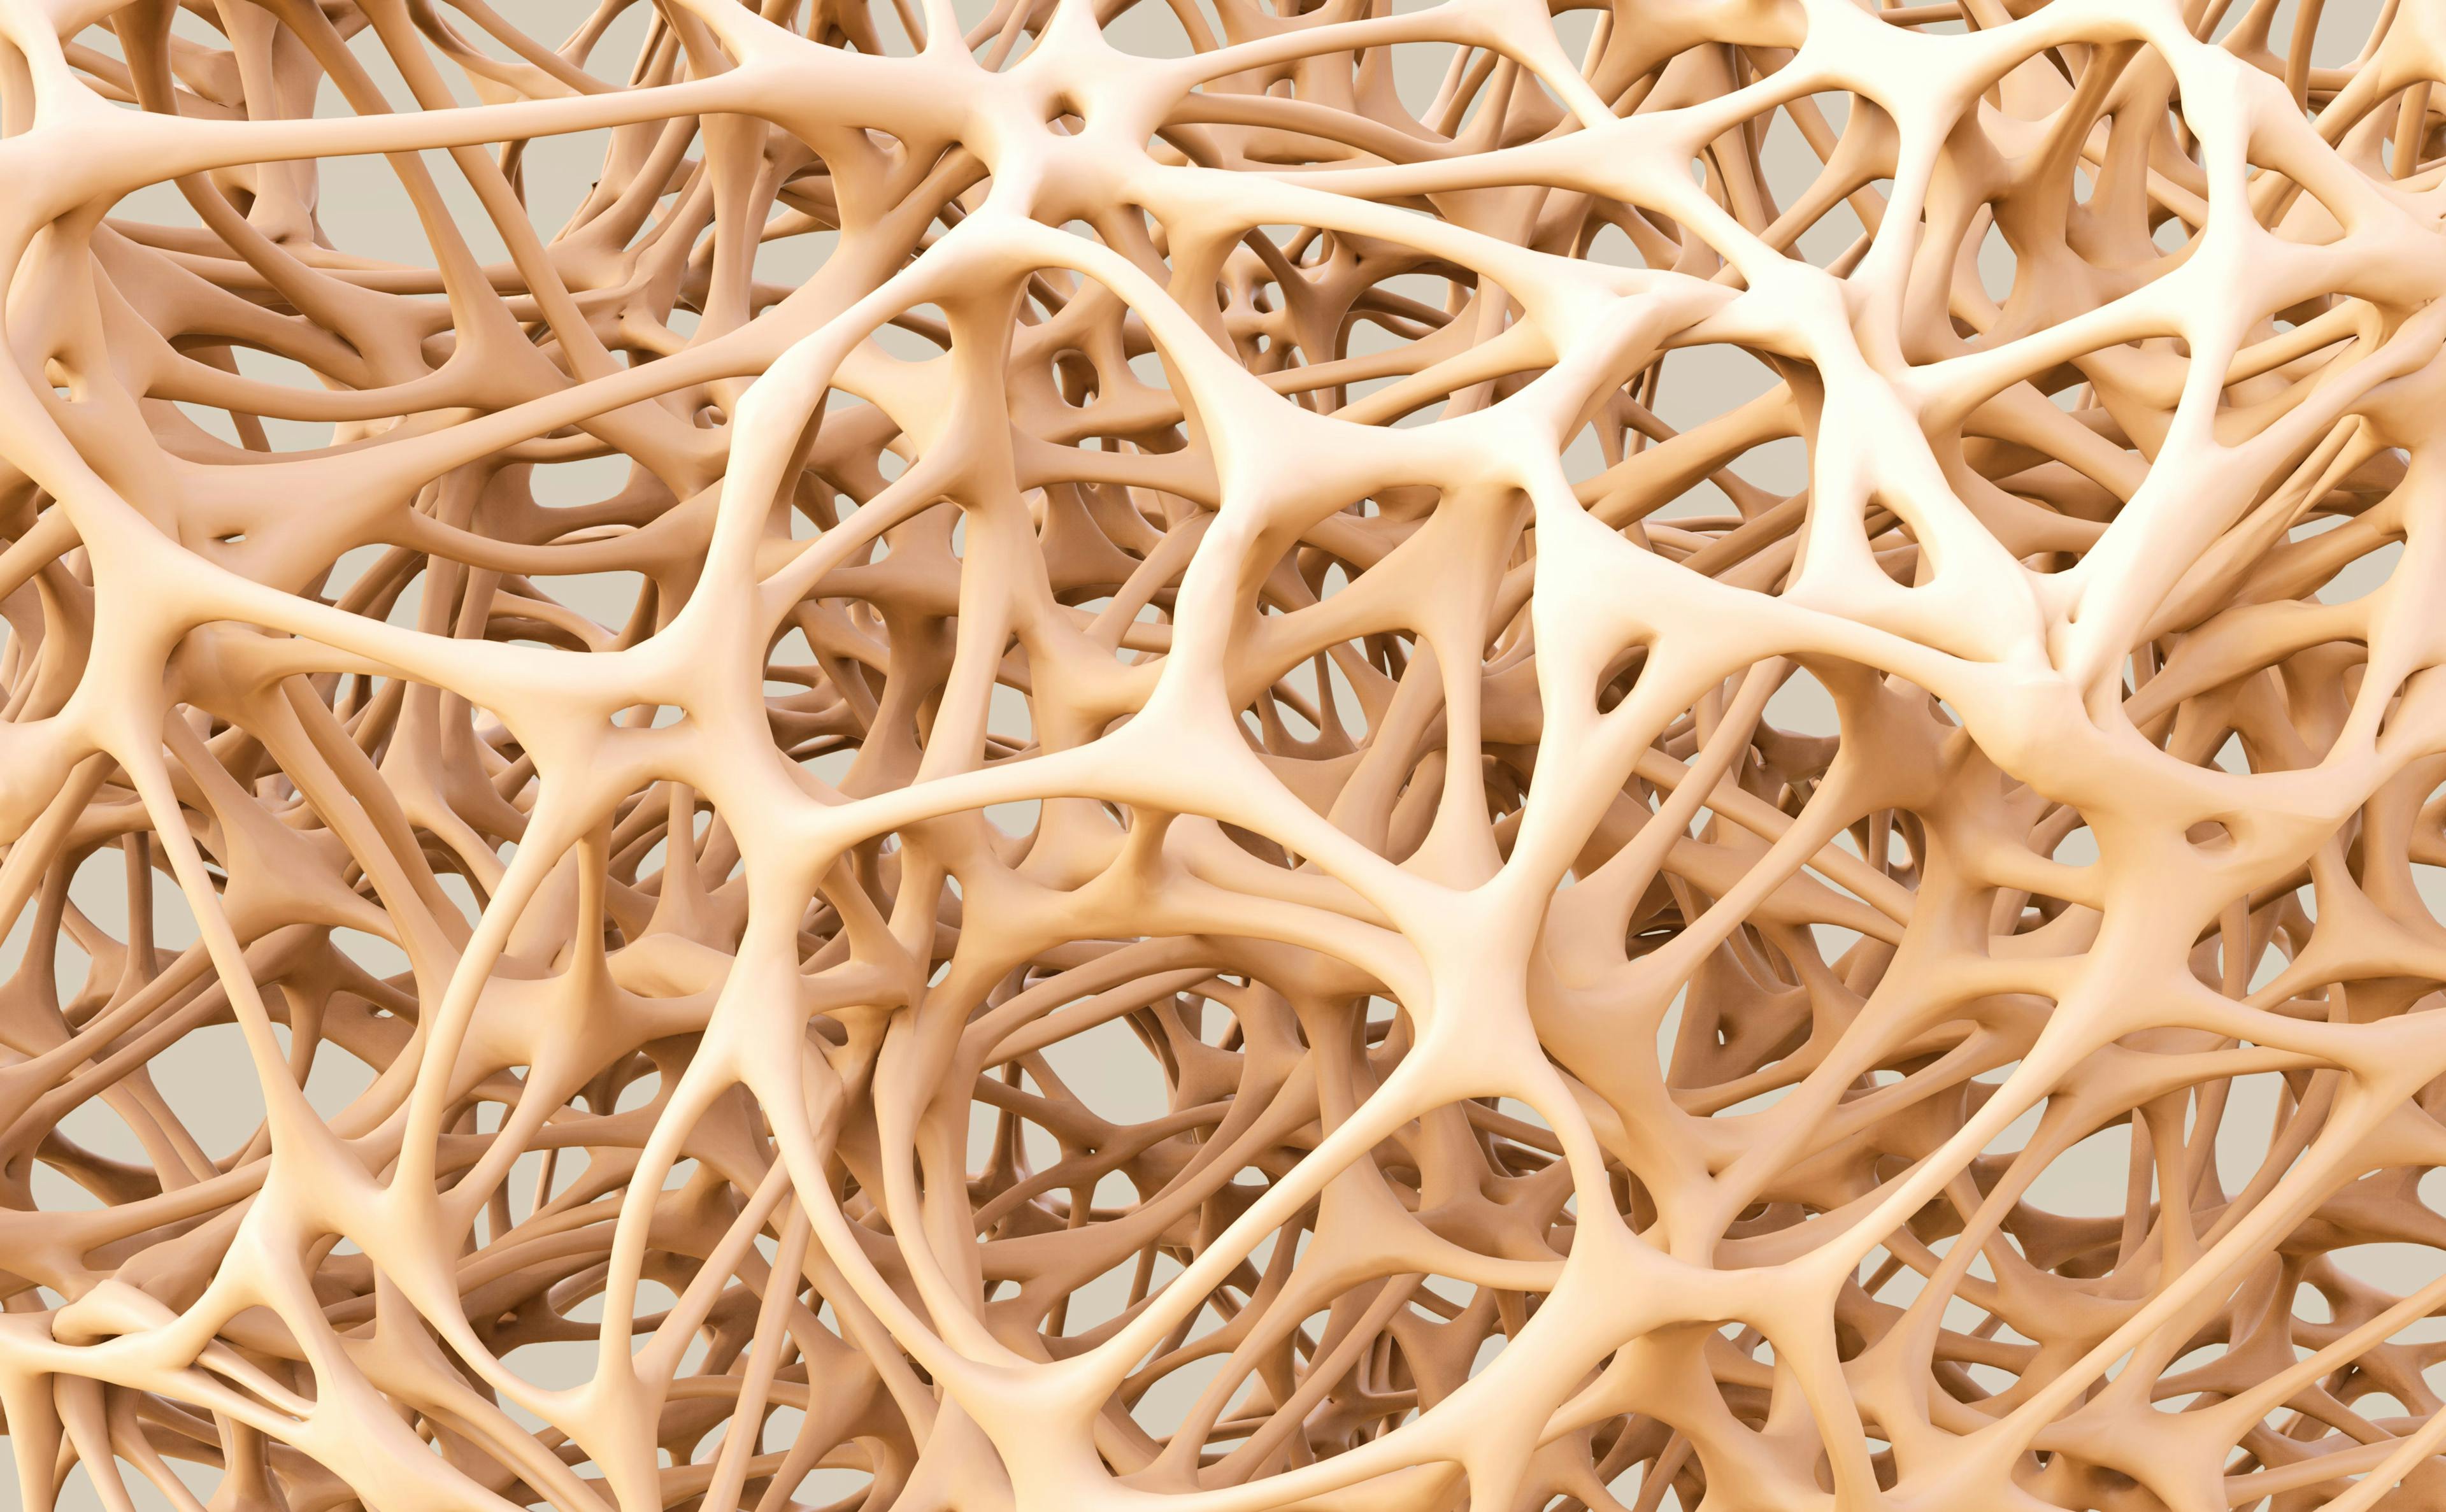 NSAID Use May Reduce Effectiveness of Osteoporosis Therapies